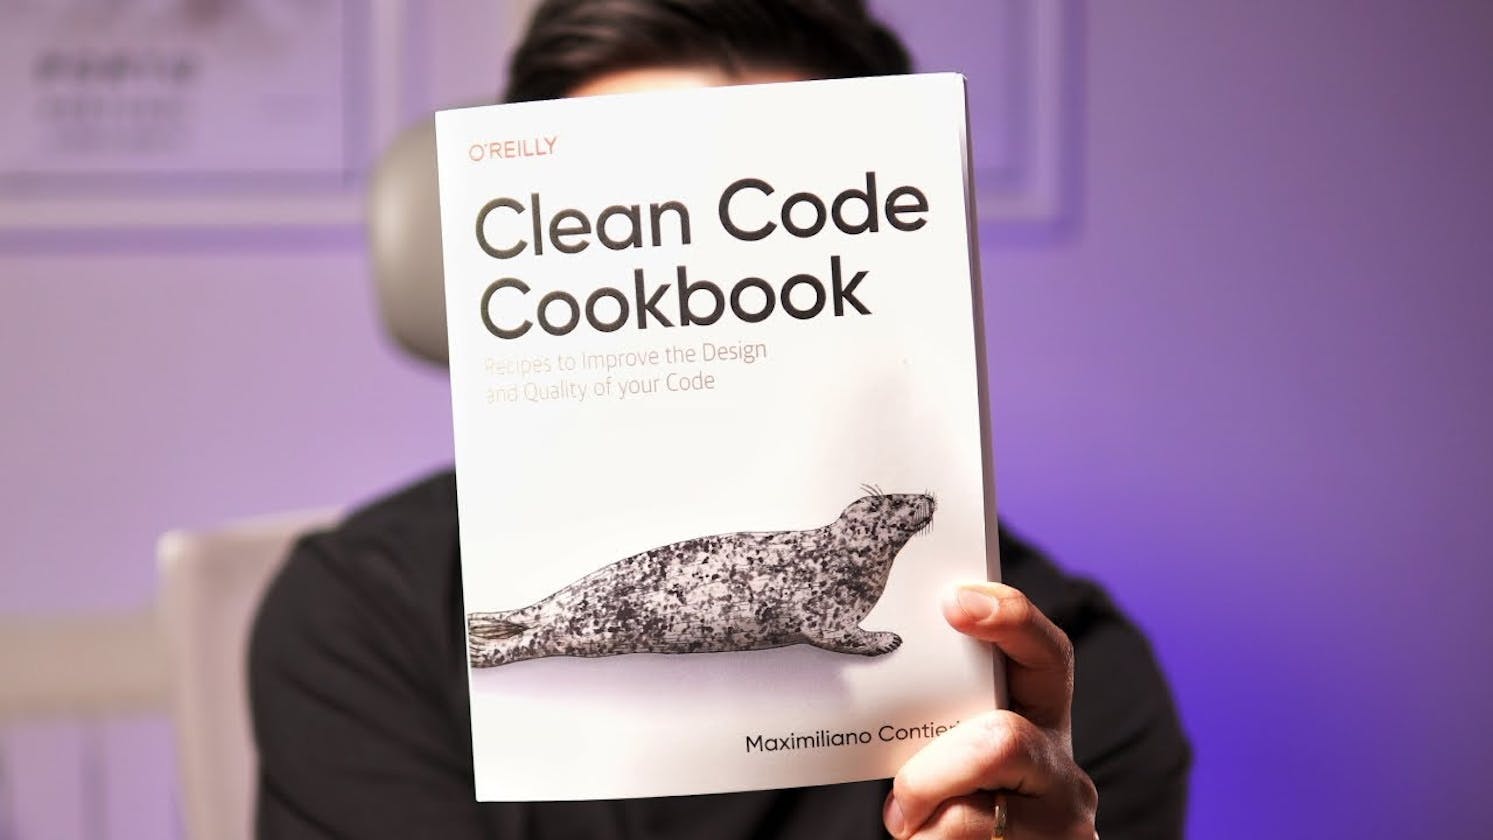 The Best Practical Book to Learn Clean Code